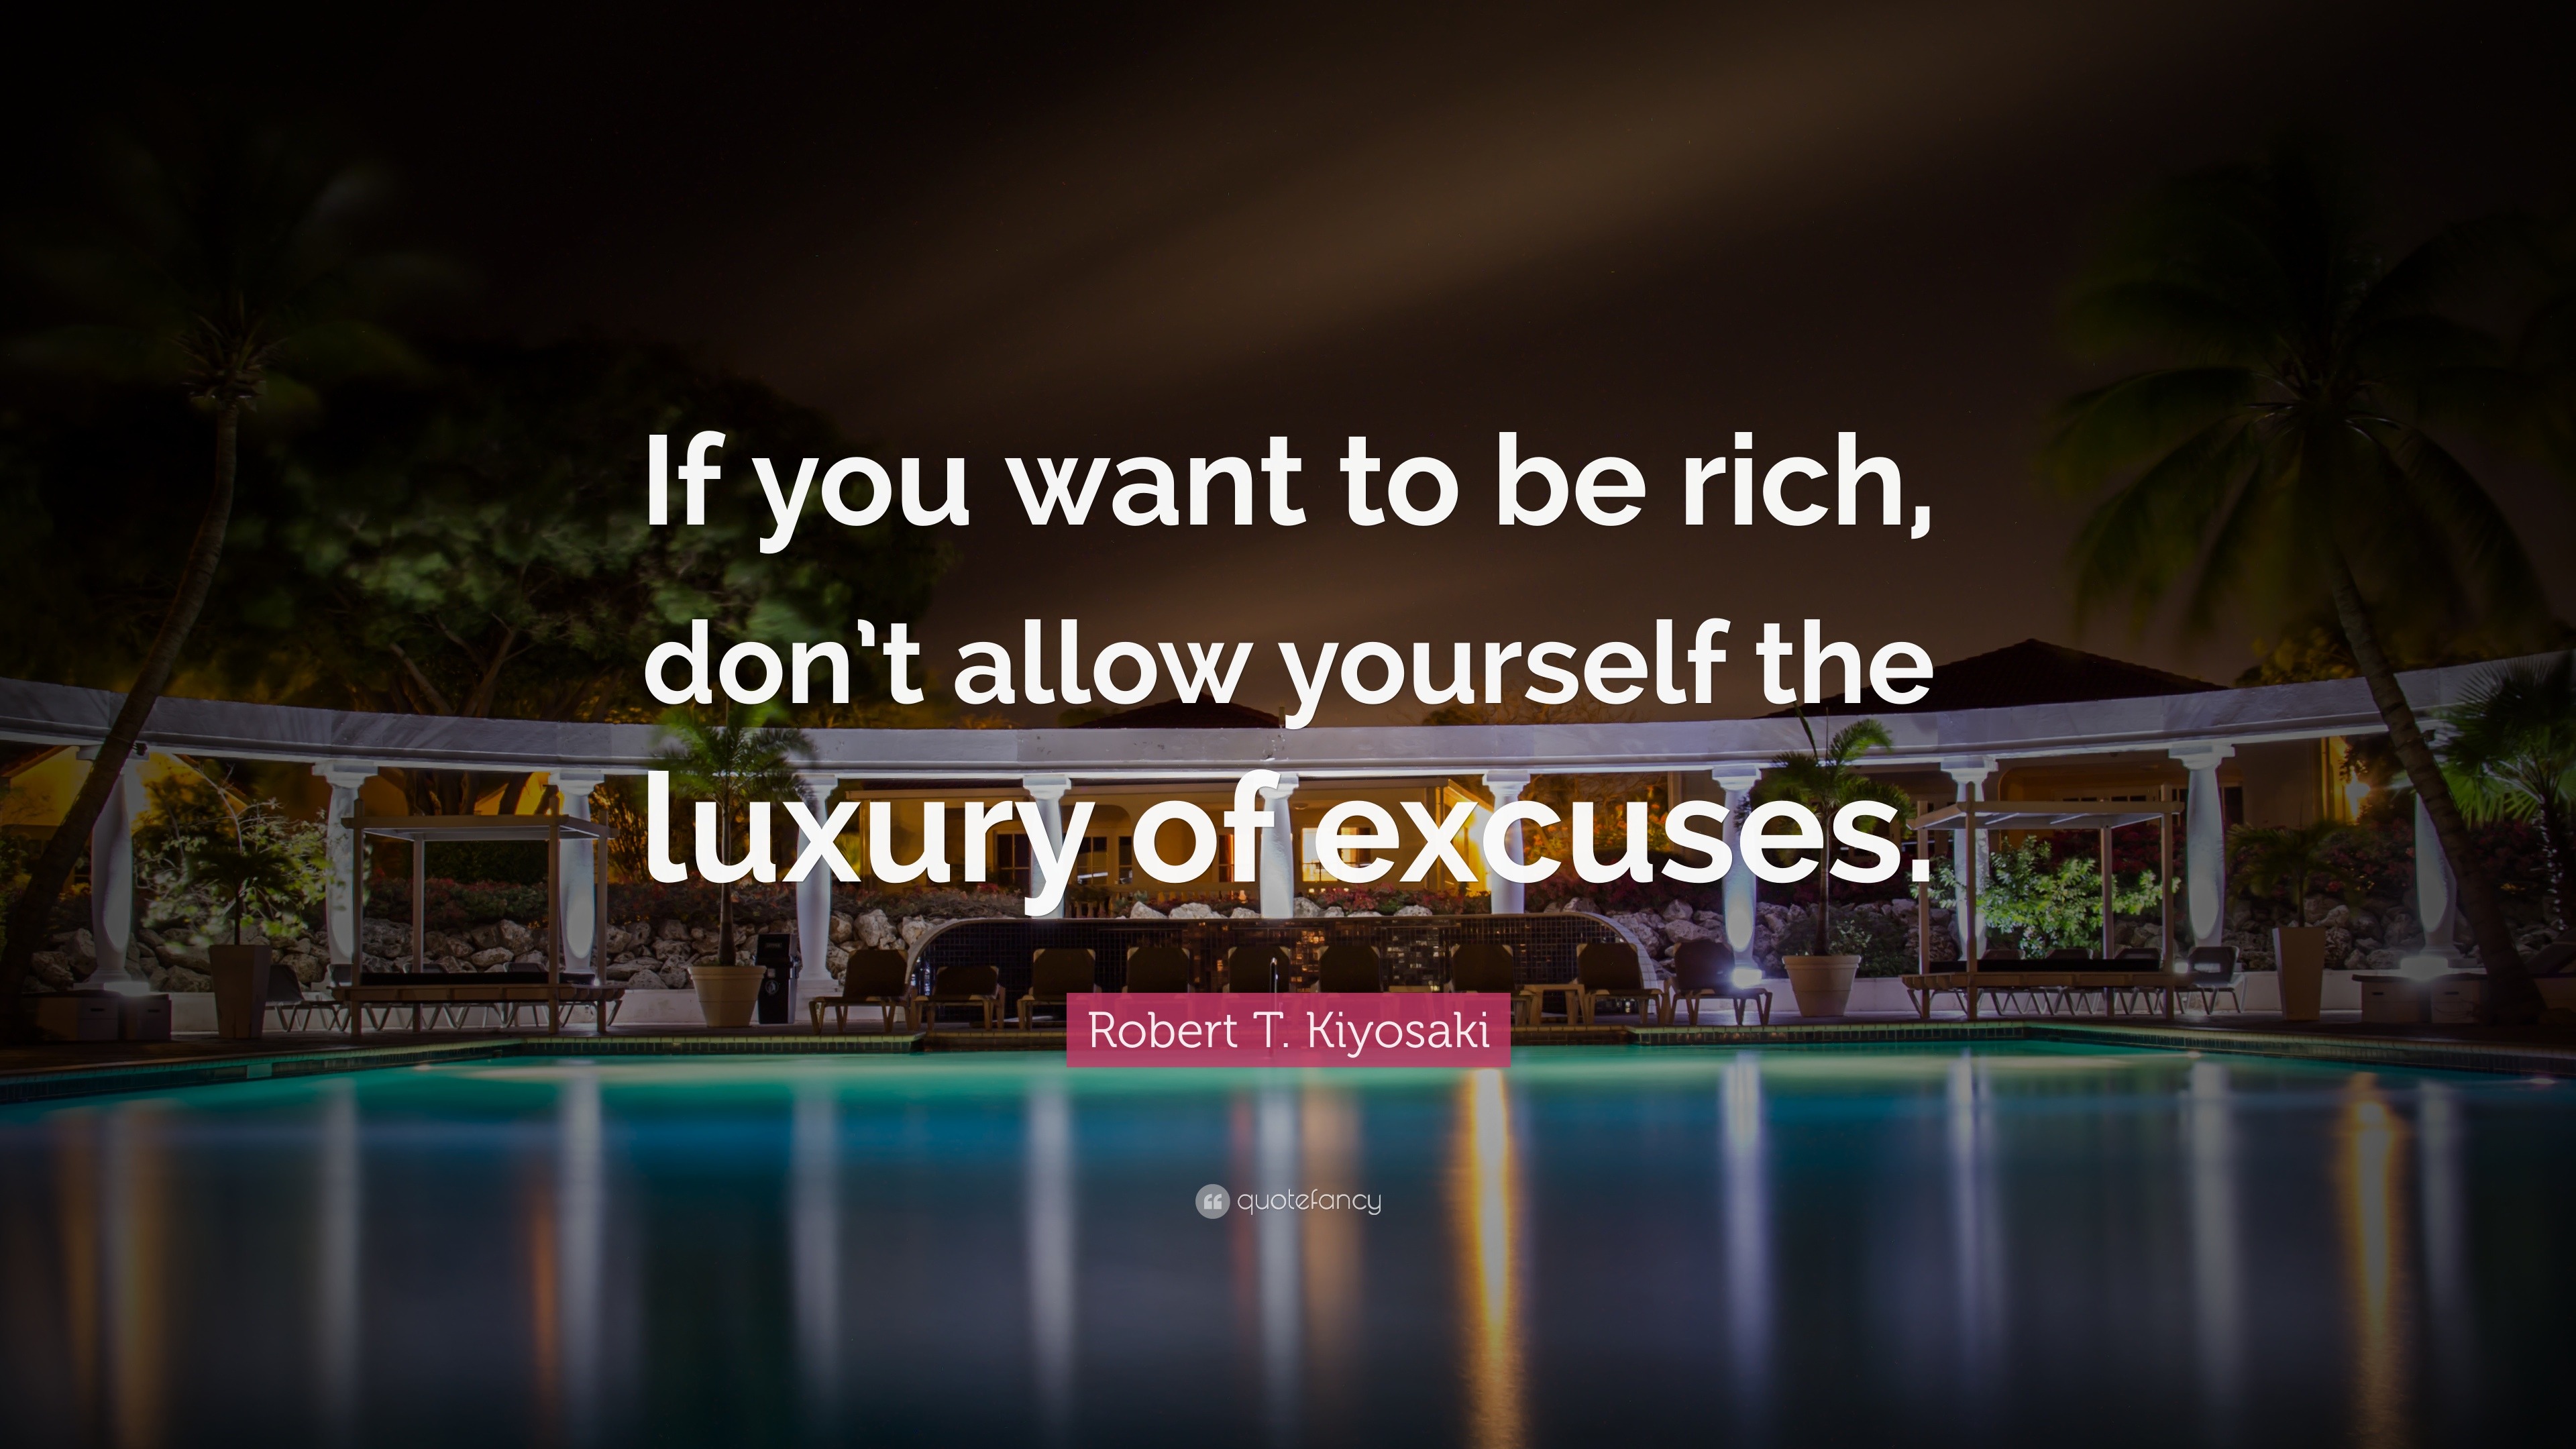 Robert T Kiyosaki Quote If You Want To Be Rich Don T Allow Yourself The Luxury Of Excuses 12 Wallpapers Quotefancy Find over 100+ of the best free rich images. robert t kiyosaki quote if you want